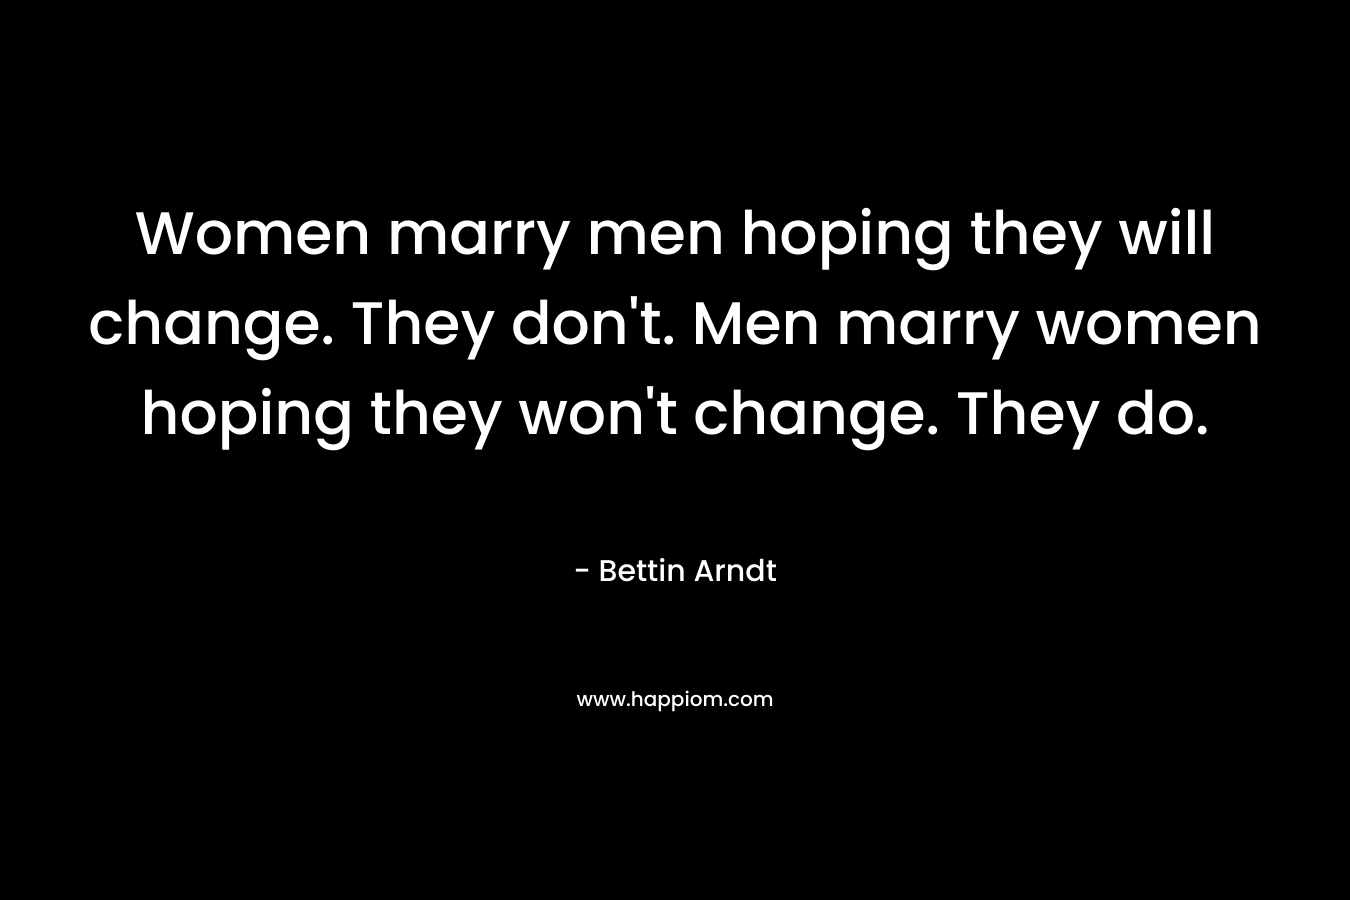 Women marry men hoping they will change. They don't. Men marry women hoping they won't change. They do.